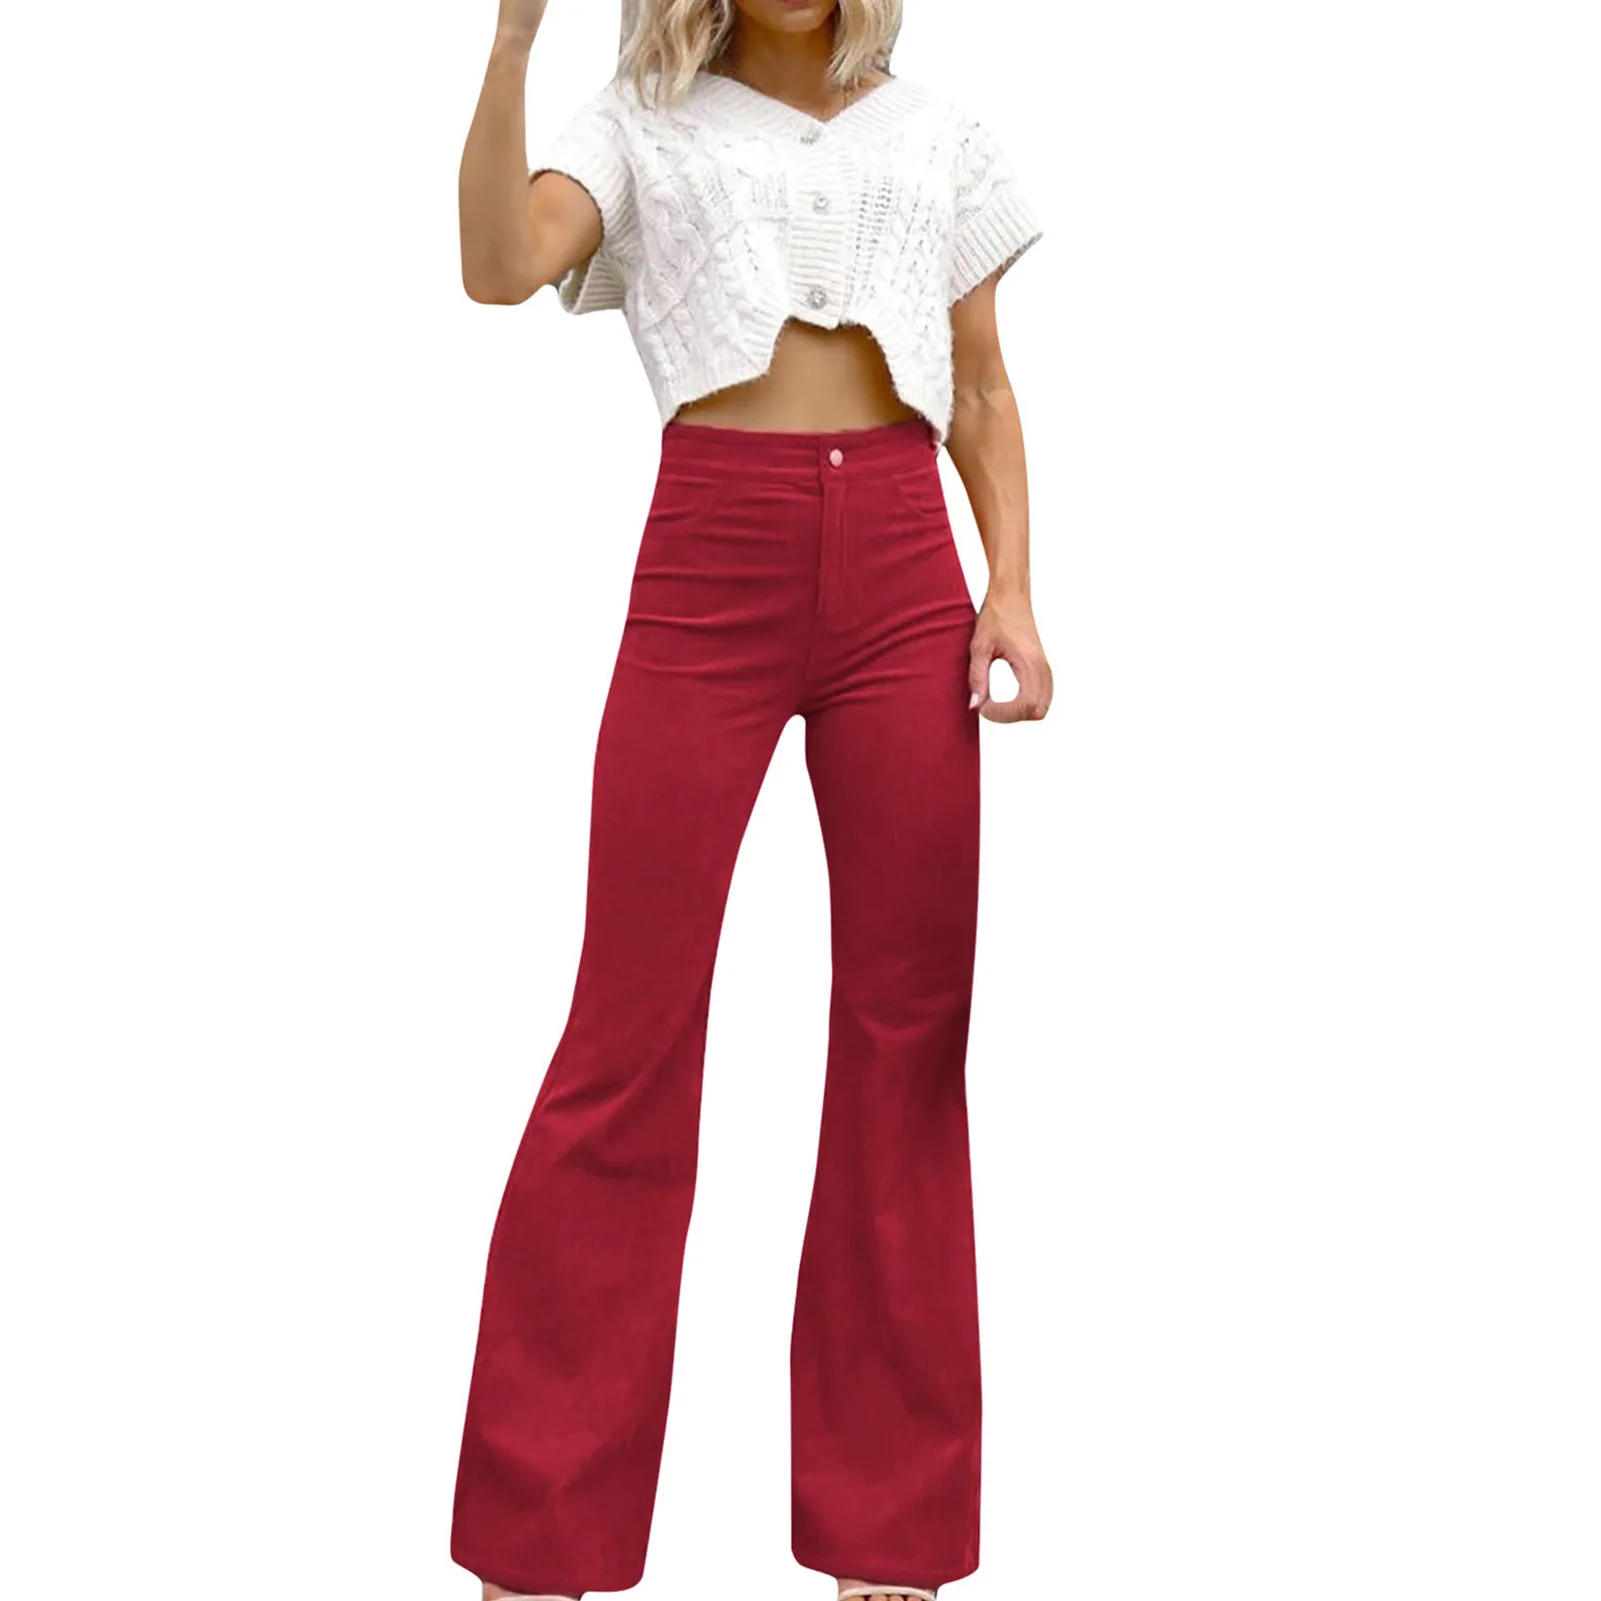 Women Pants Bell Bottom Bootcut Wide Leg Daily Fashion Casual High Waist Long Trousers Soft Solid With Pockets Corduroy